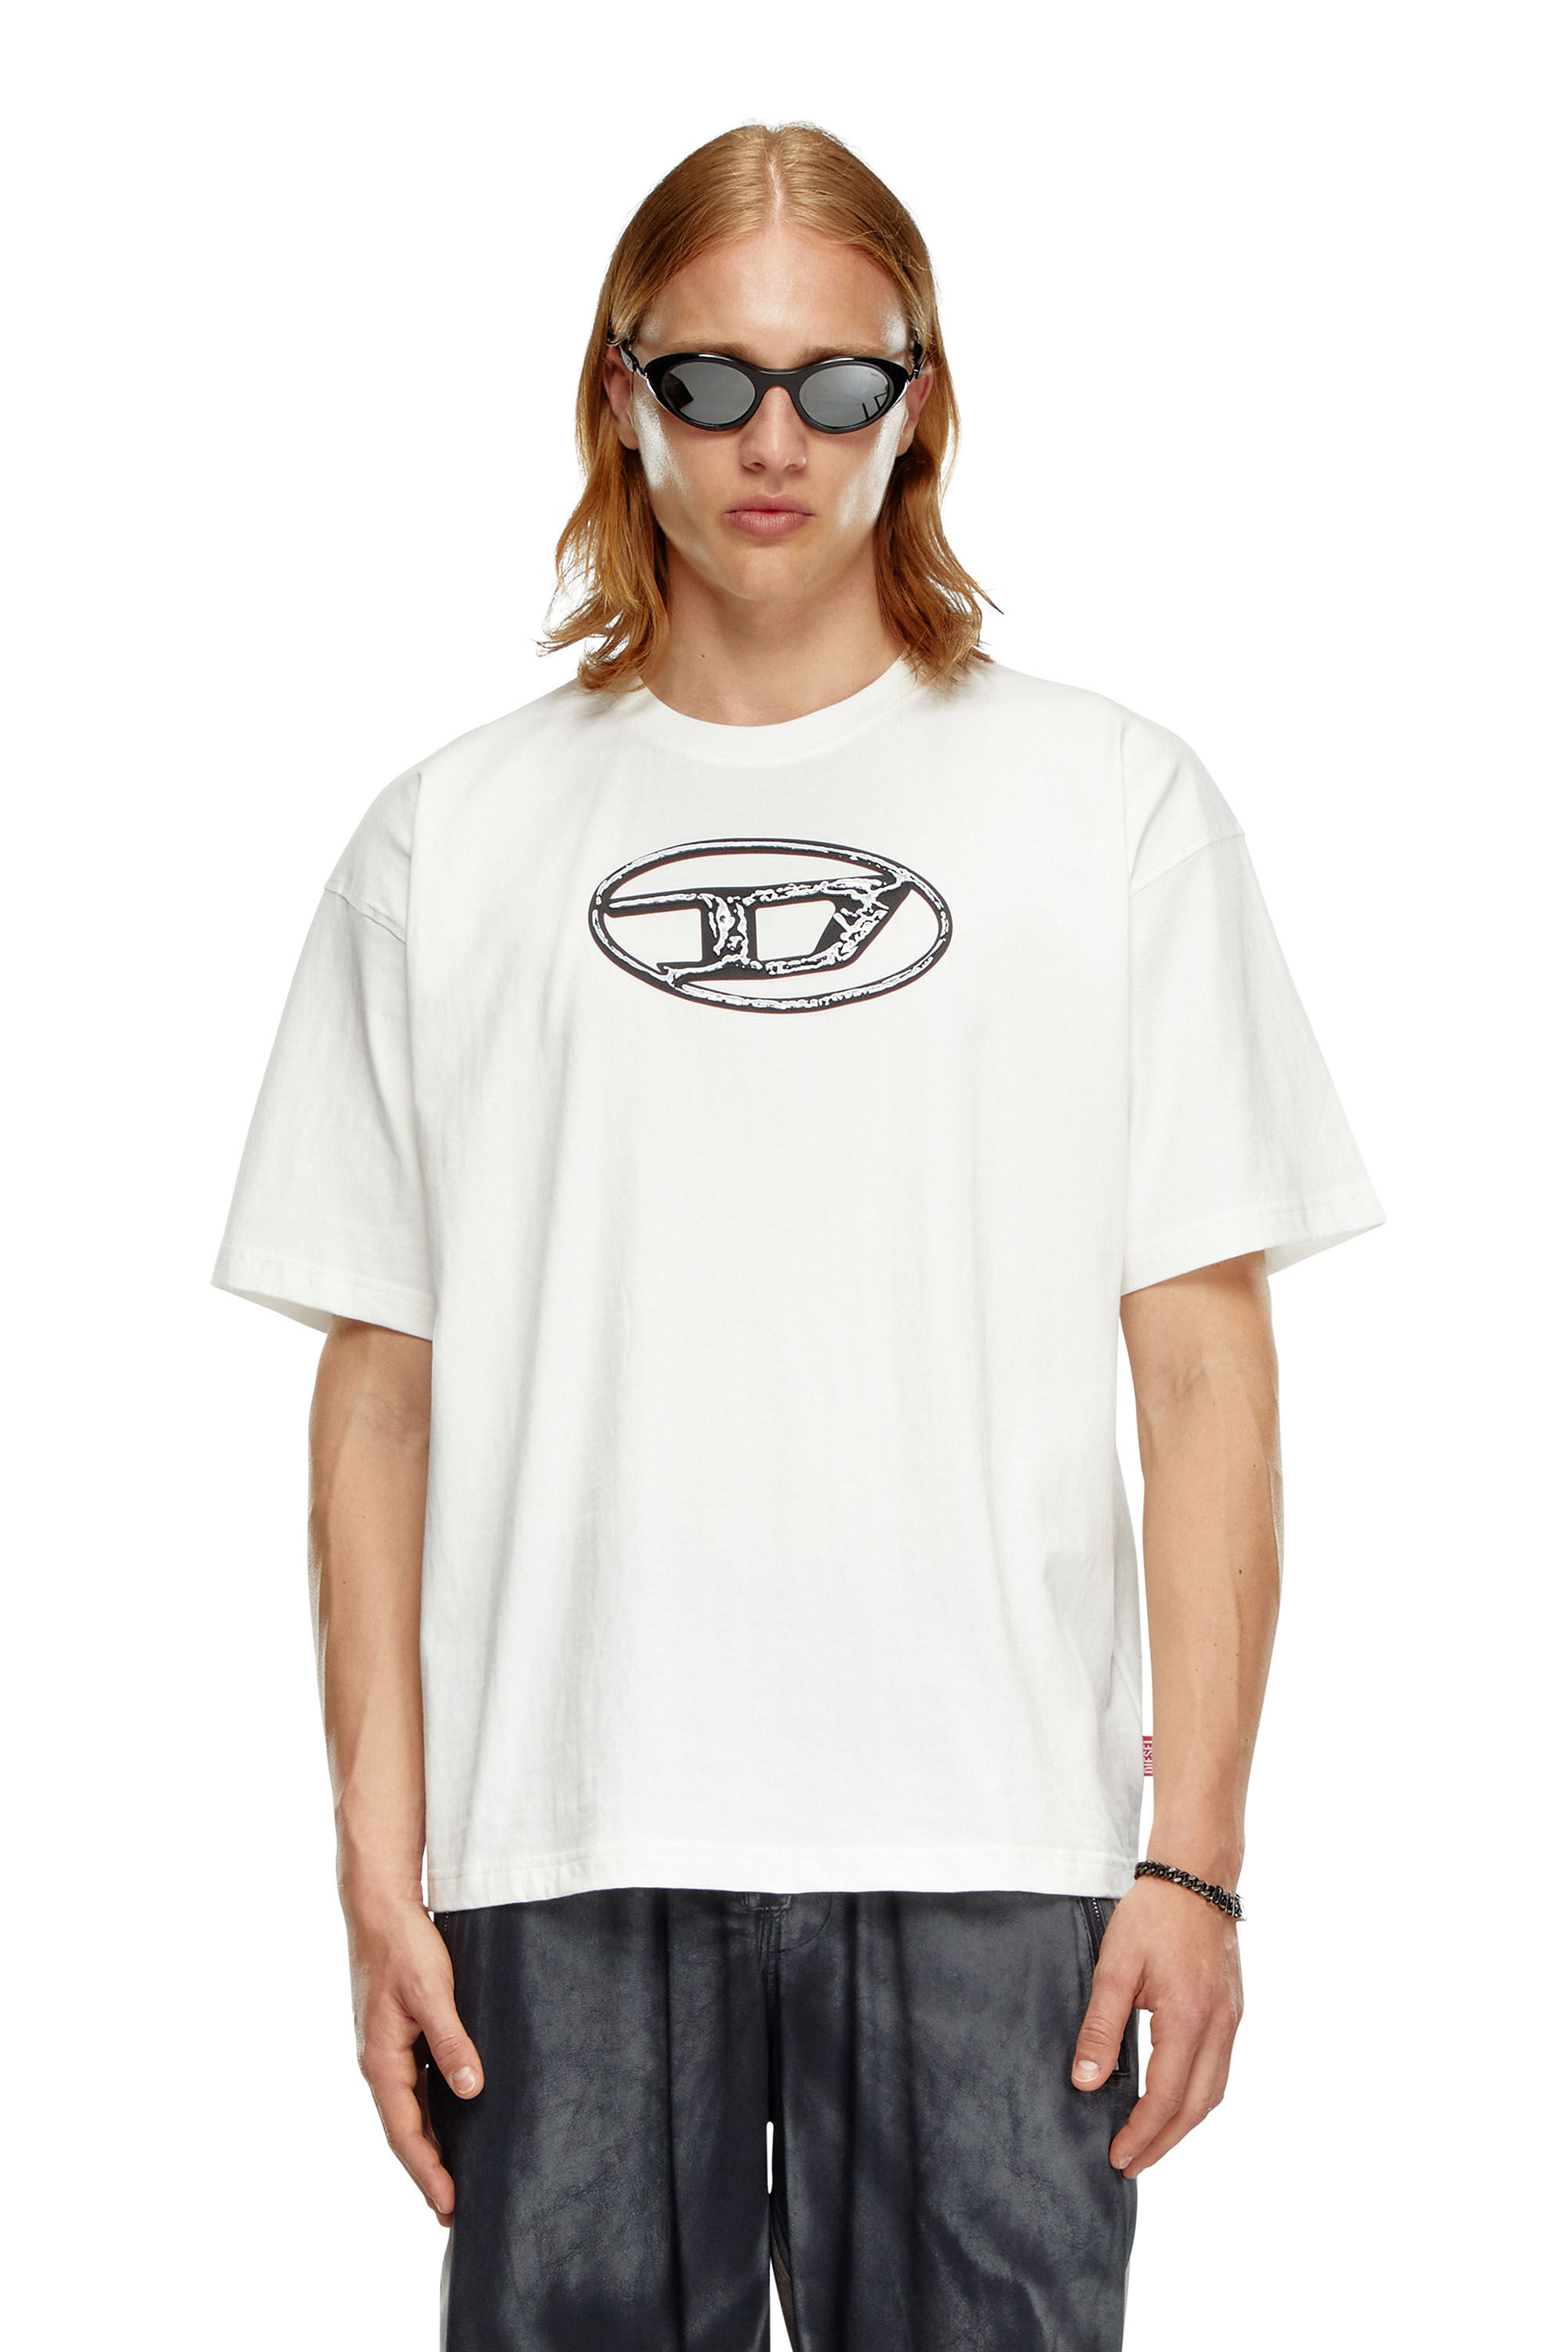 Diesel - T-BOXT-Q22, Man Faded T-shirt with Oval D print in White - Image 3